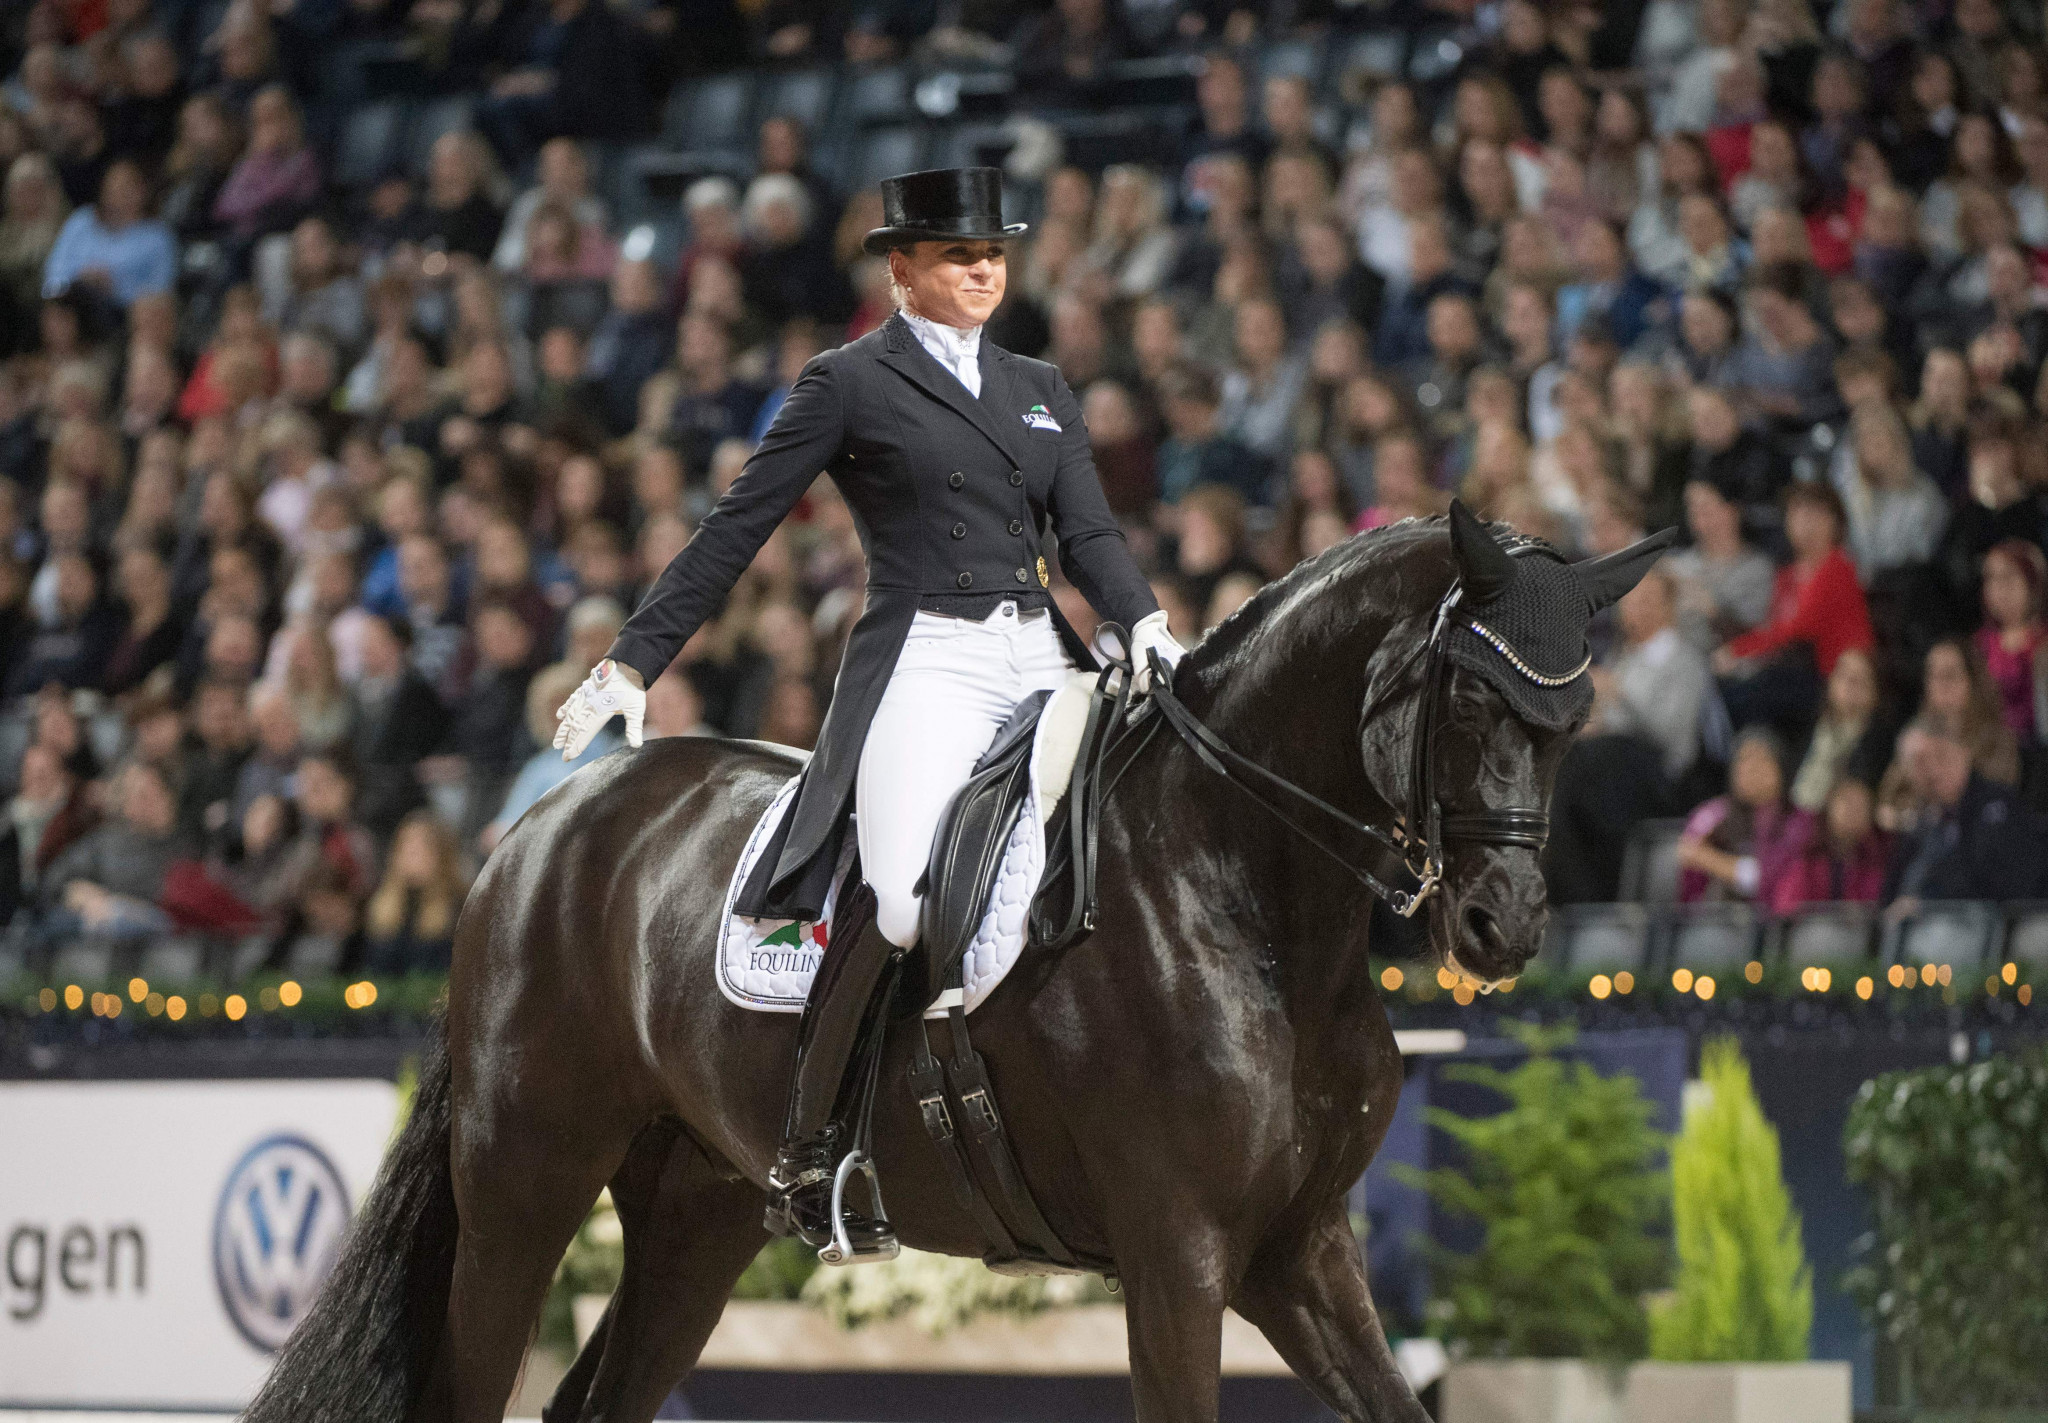 Germany's Dorothee Schneider came second in the FEI Dressage World Cup event in Amsterdam and leads the overall standings ©Getty Images